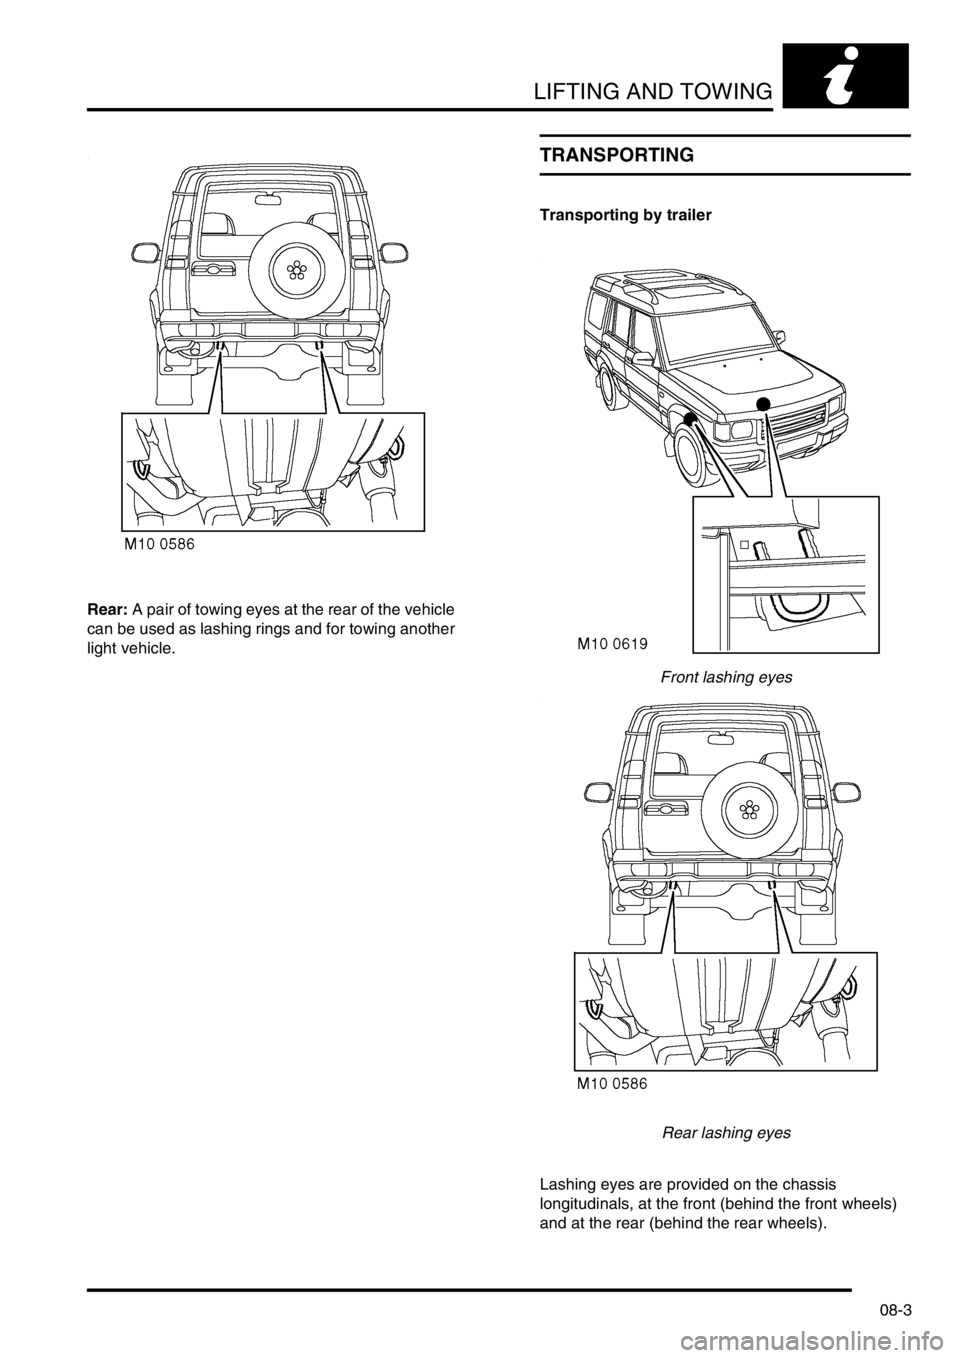 LAND ROVER DISCOVERY 2002  Workshop Manual LIFTING AND TOWING
08-3
Rear: A pair of towing eyes at the rear of the vehicle 
can be used as lashing rings and for towing another 
light vehicle.
TRANSPORTING
Transporting by trailer
Front lashing e